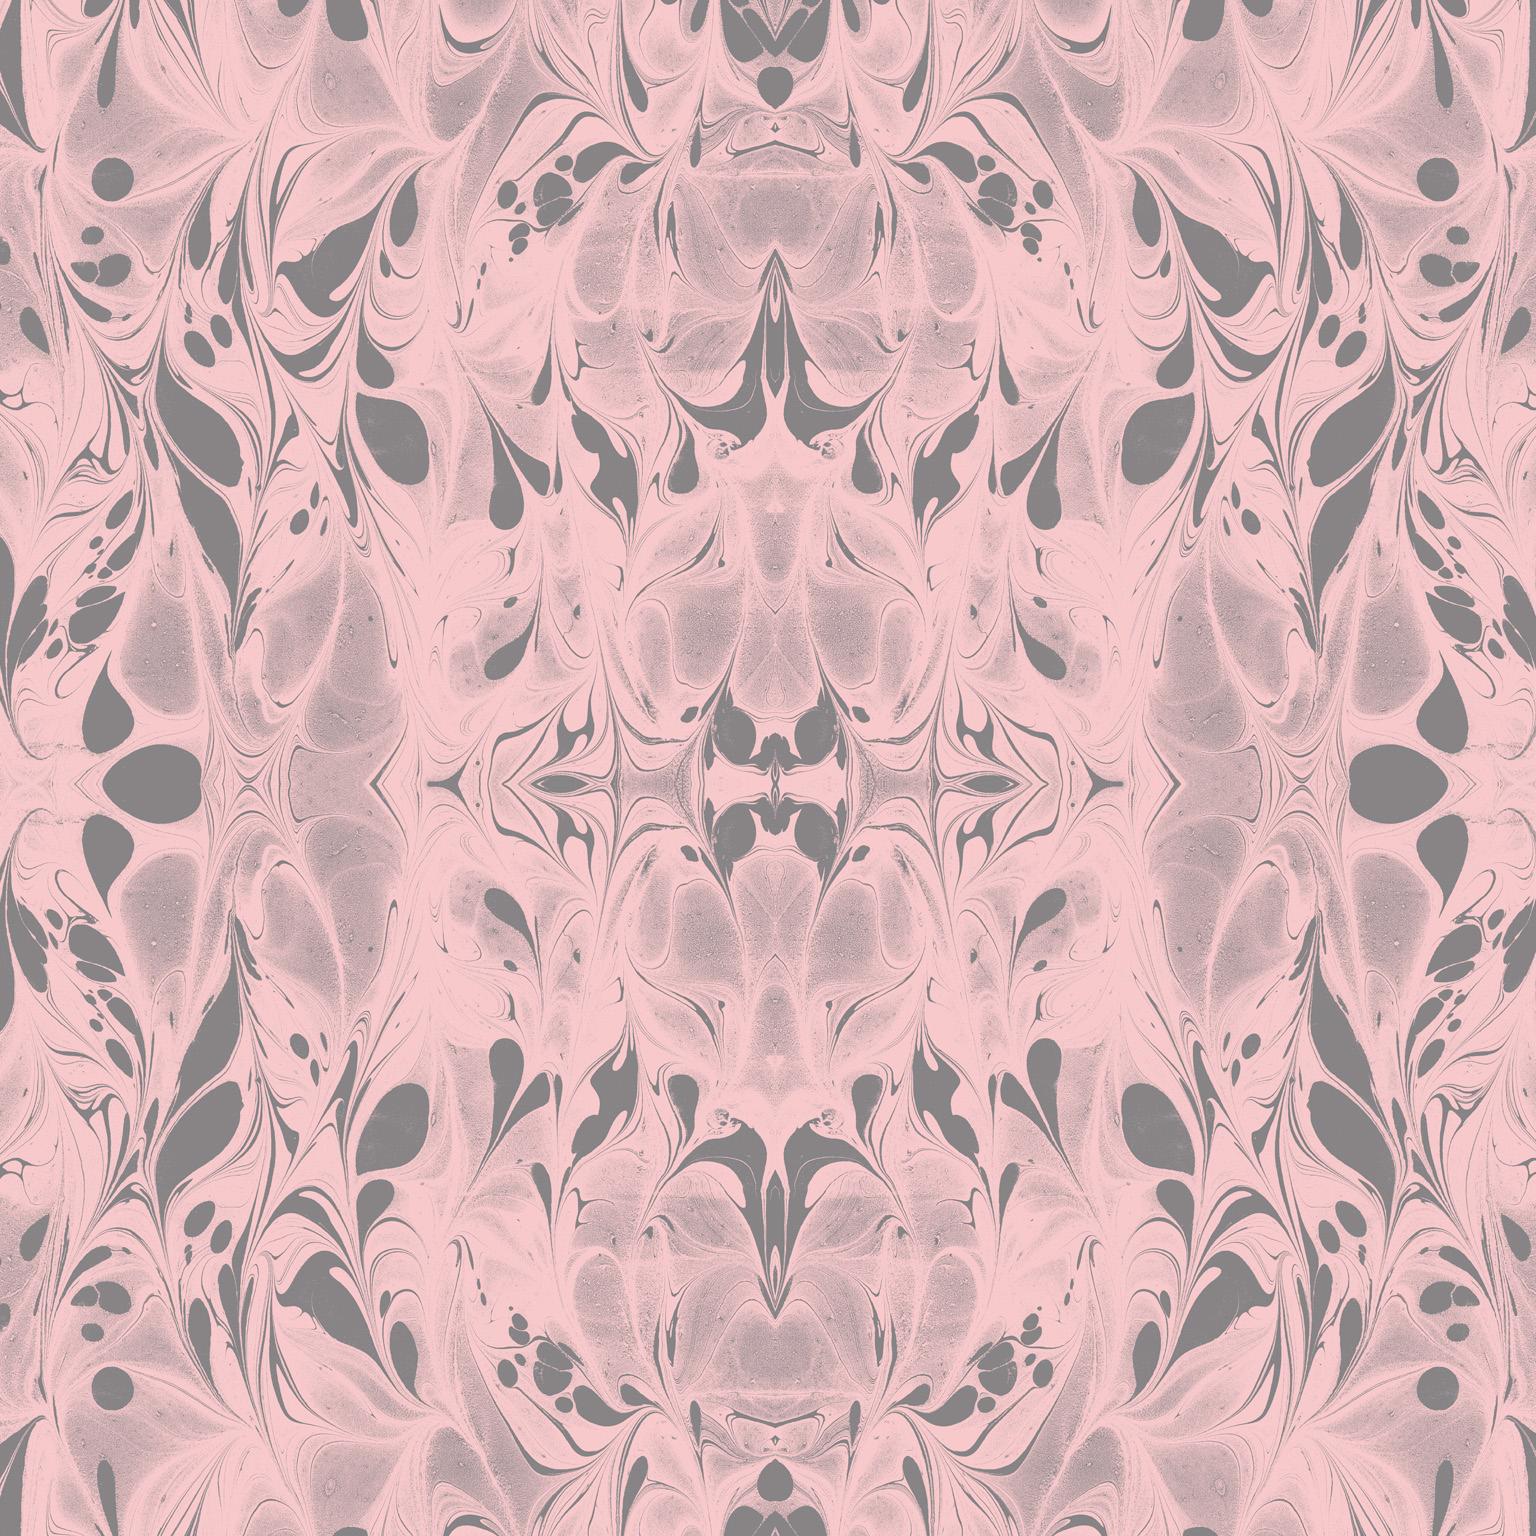 "Fluid" Marbleized Pattern in Rose Quartz Color-Way, on Smooth Paper For Sale